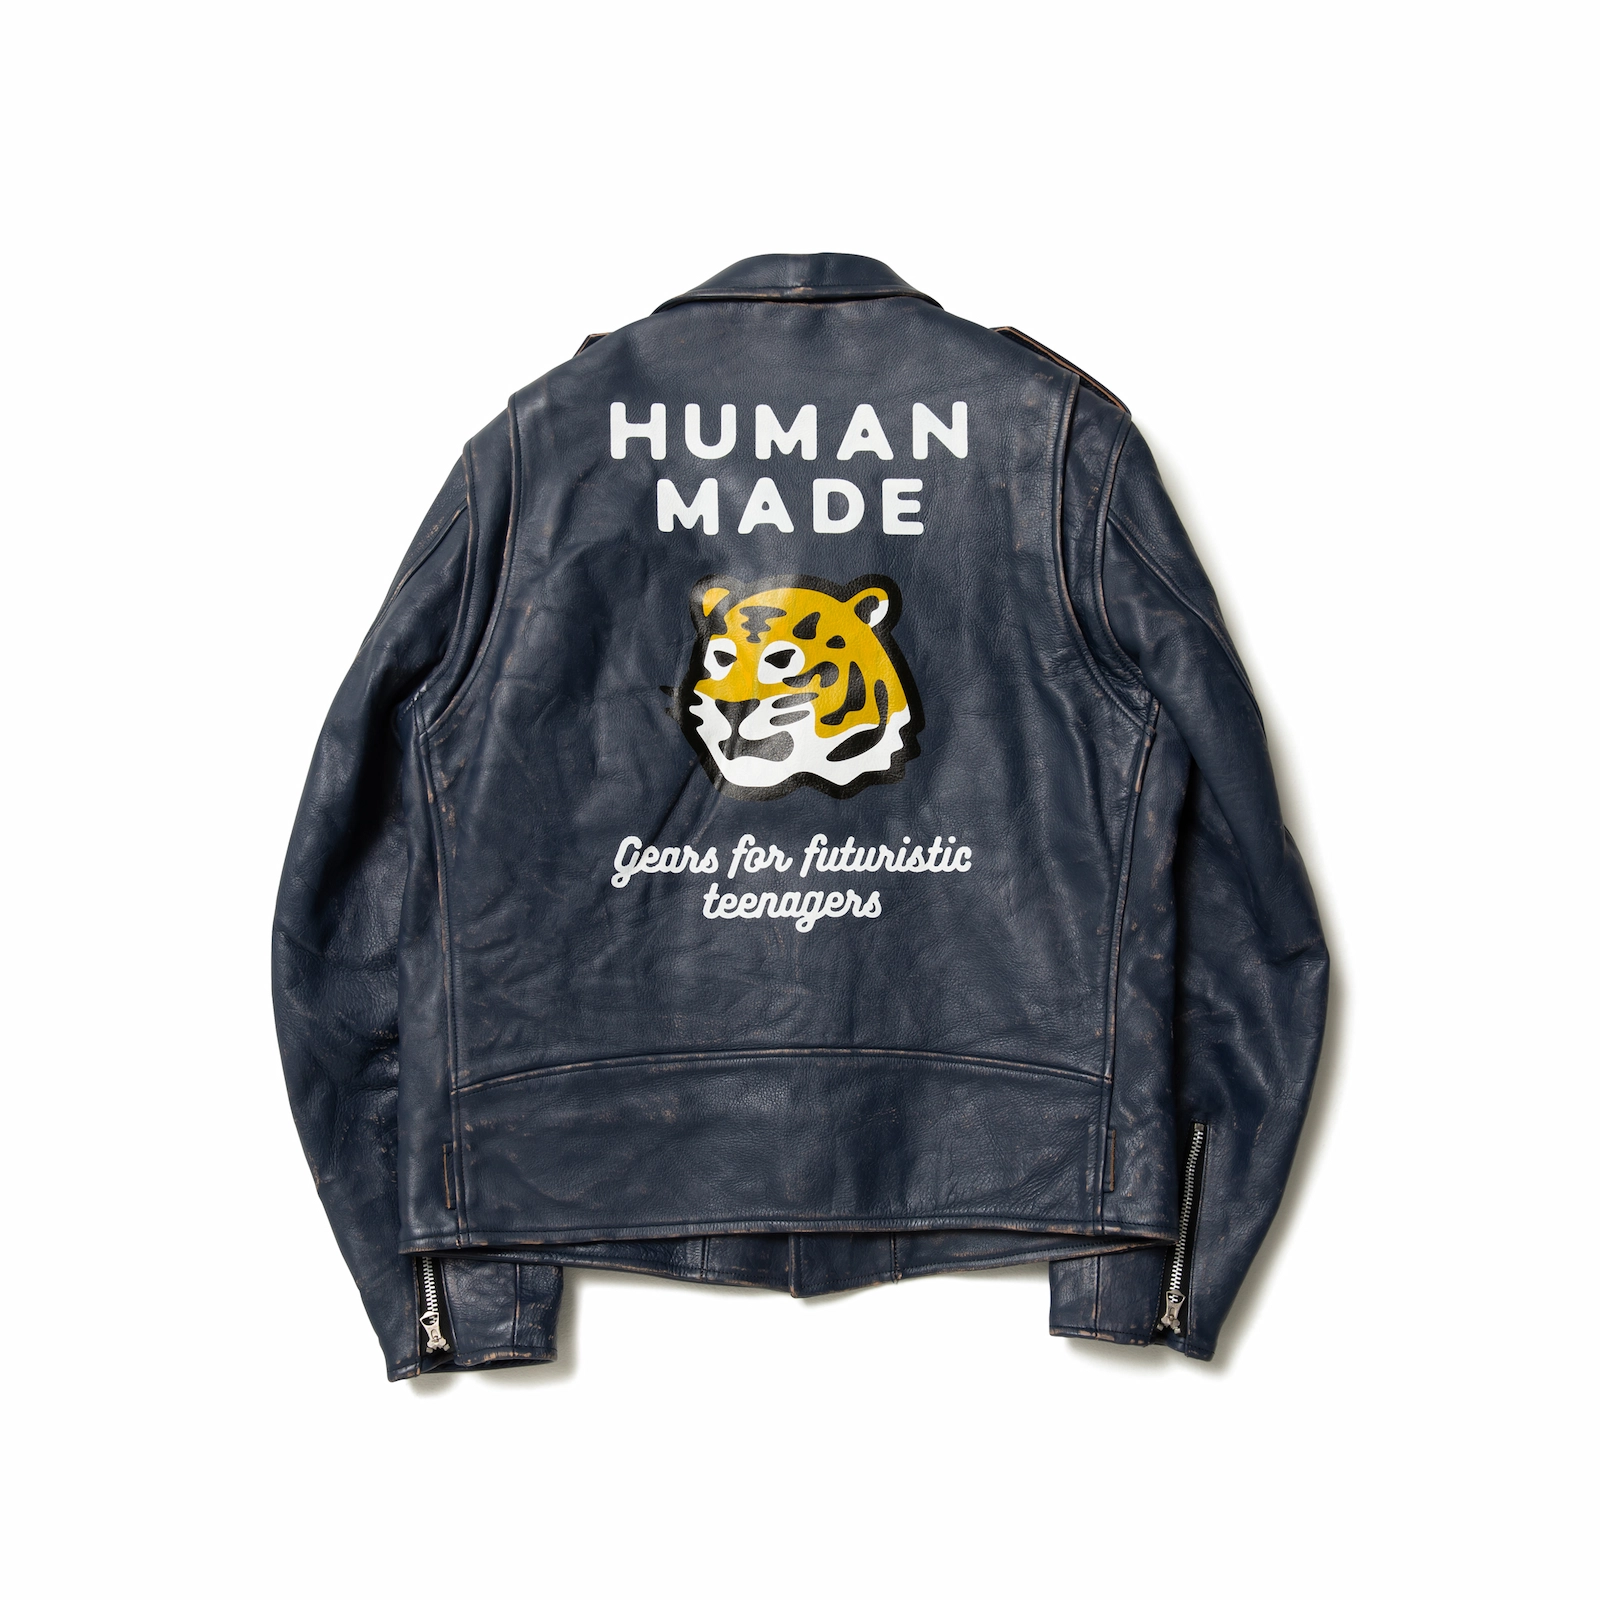 HUMAN MADE "PAST MADE" Series Launch